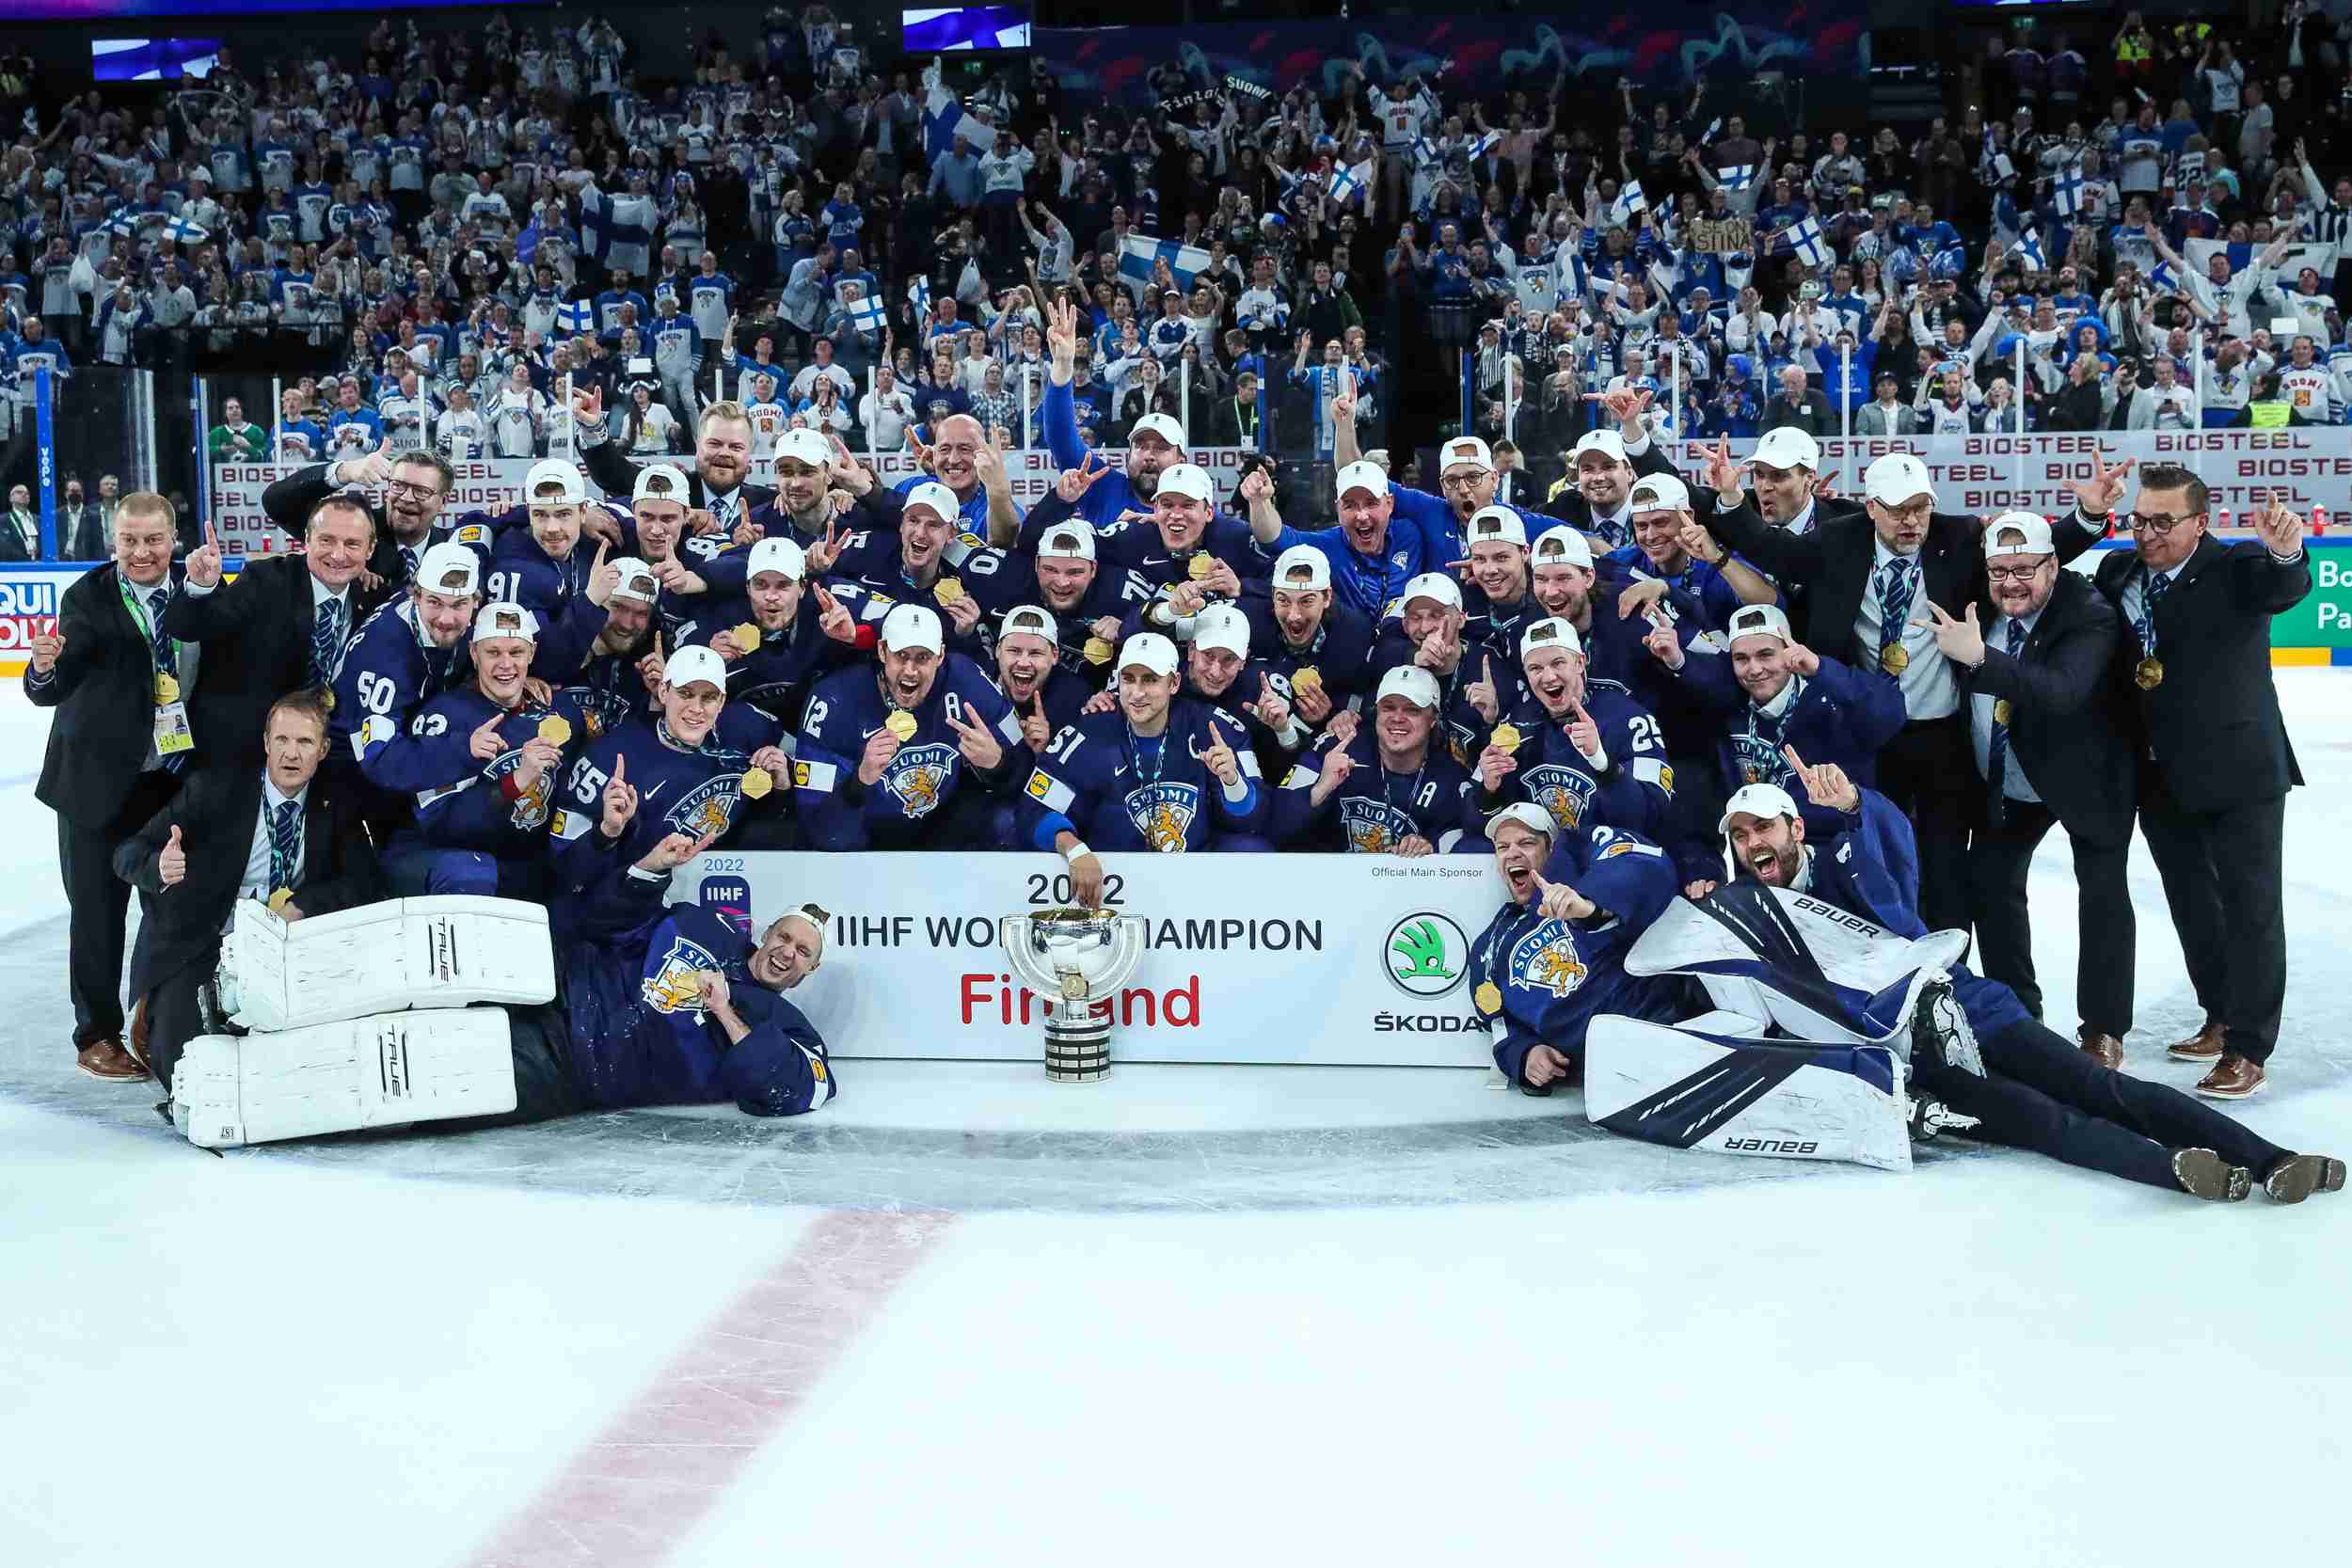 Finland the world champions in ice hockey